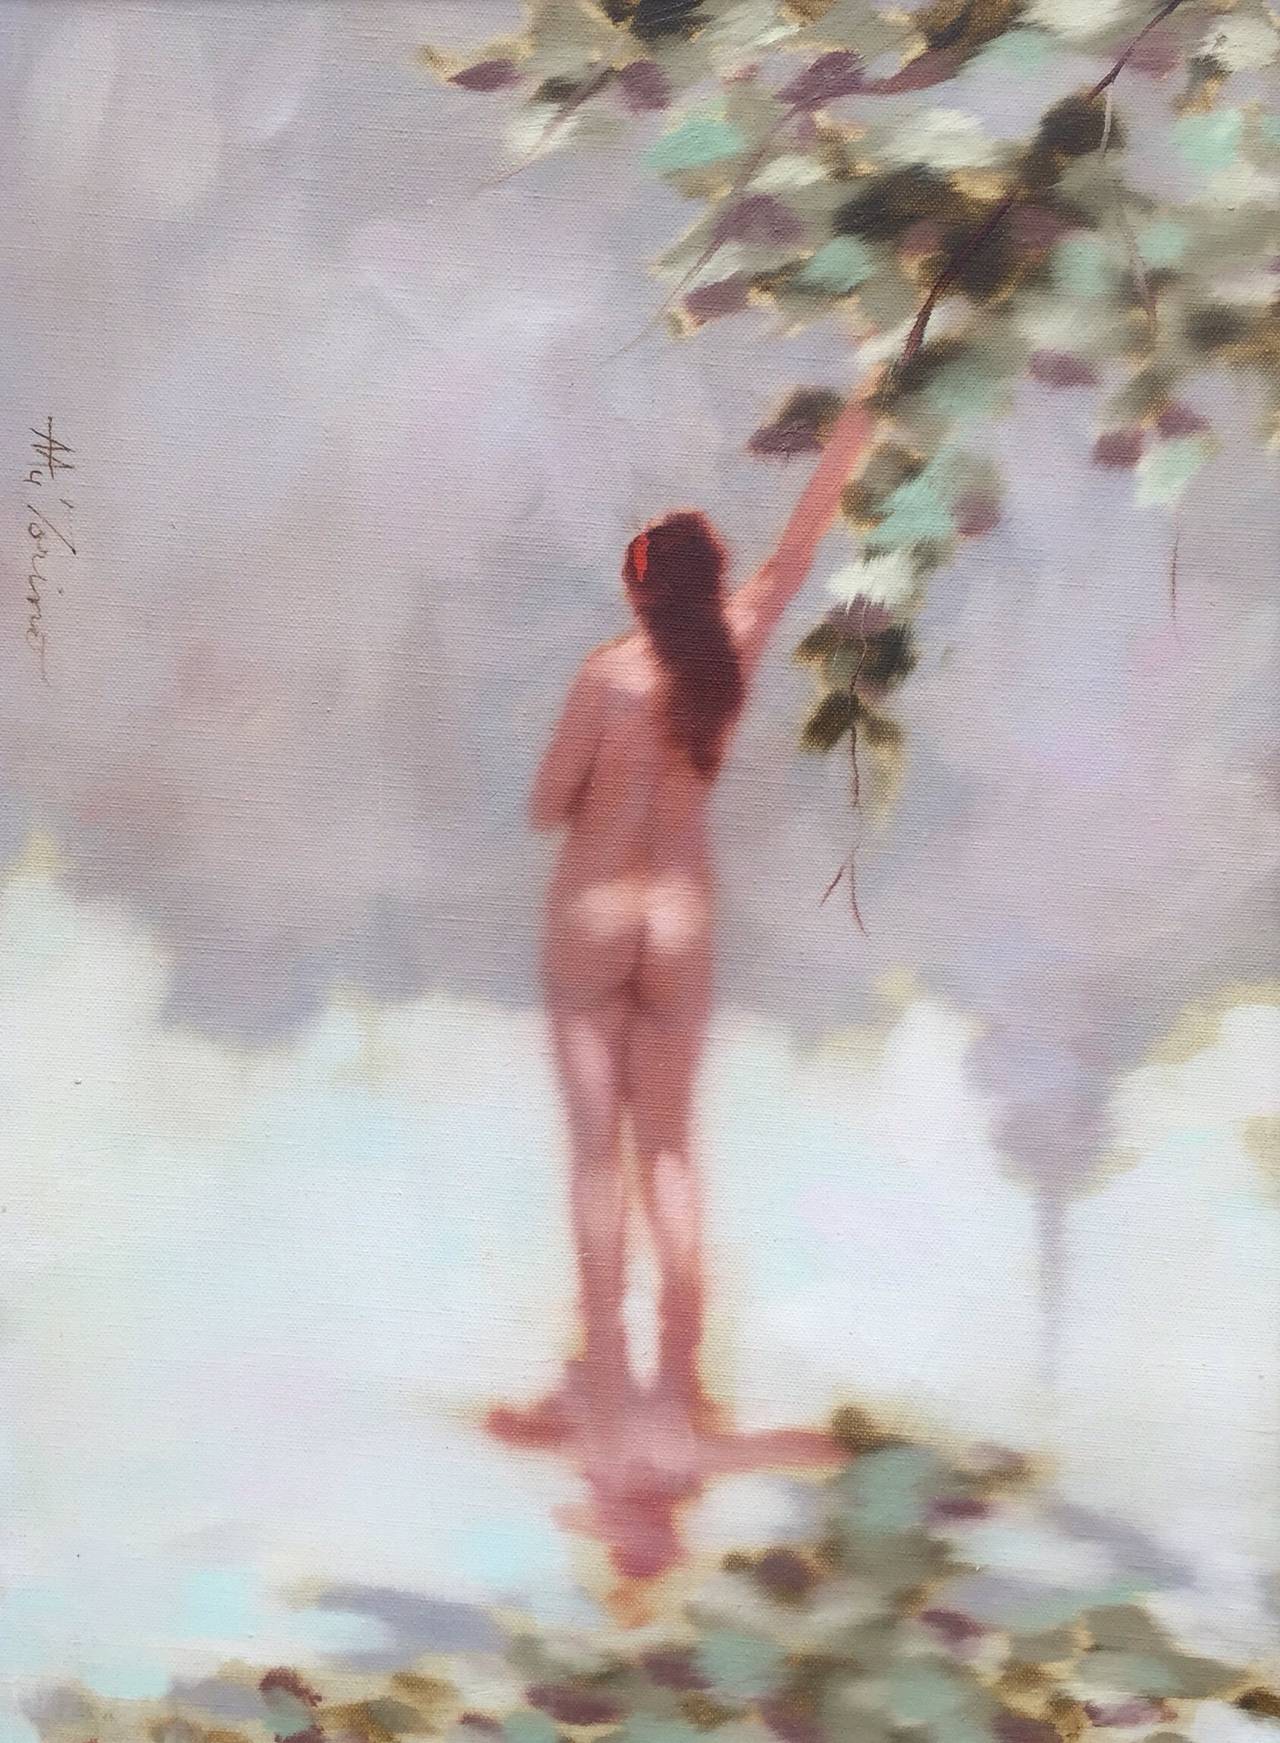 A. M. Torino Figurative Painting - "Nude in Landscape"